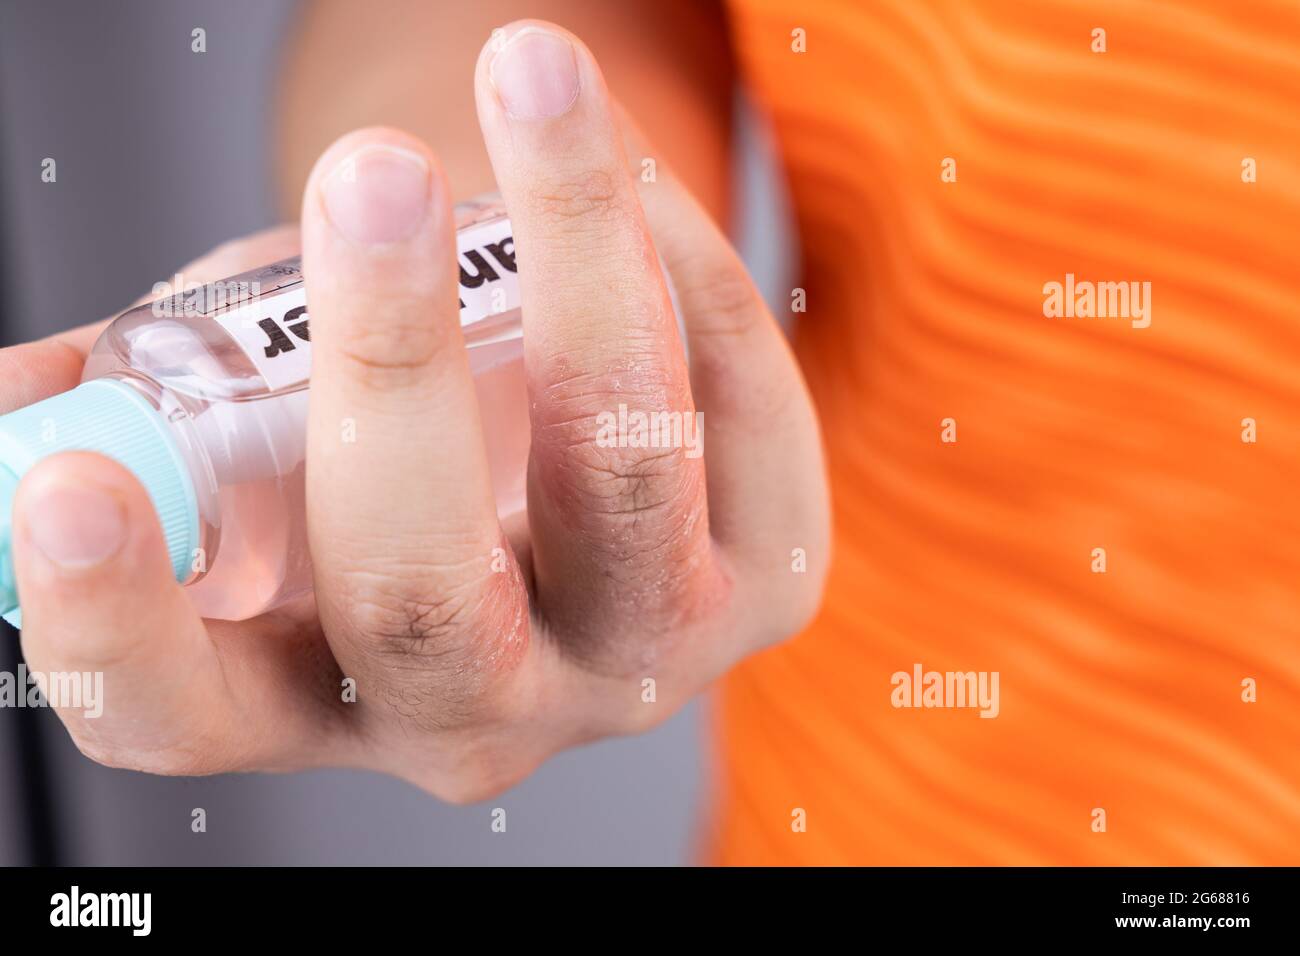 Dry skin finger with bottle of hand sanitizer. Sanitizer causes dryness with frequent use Stock Photo